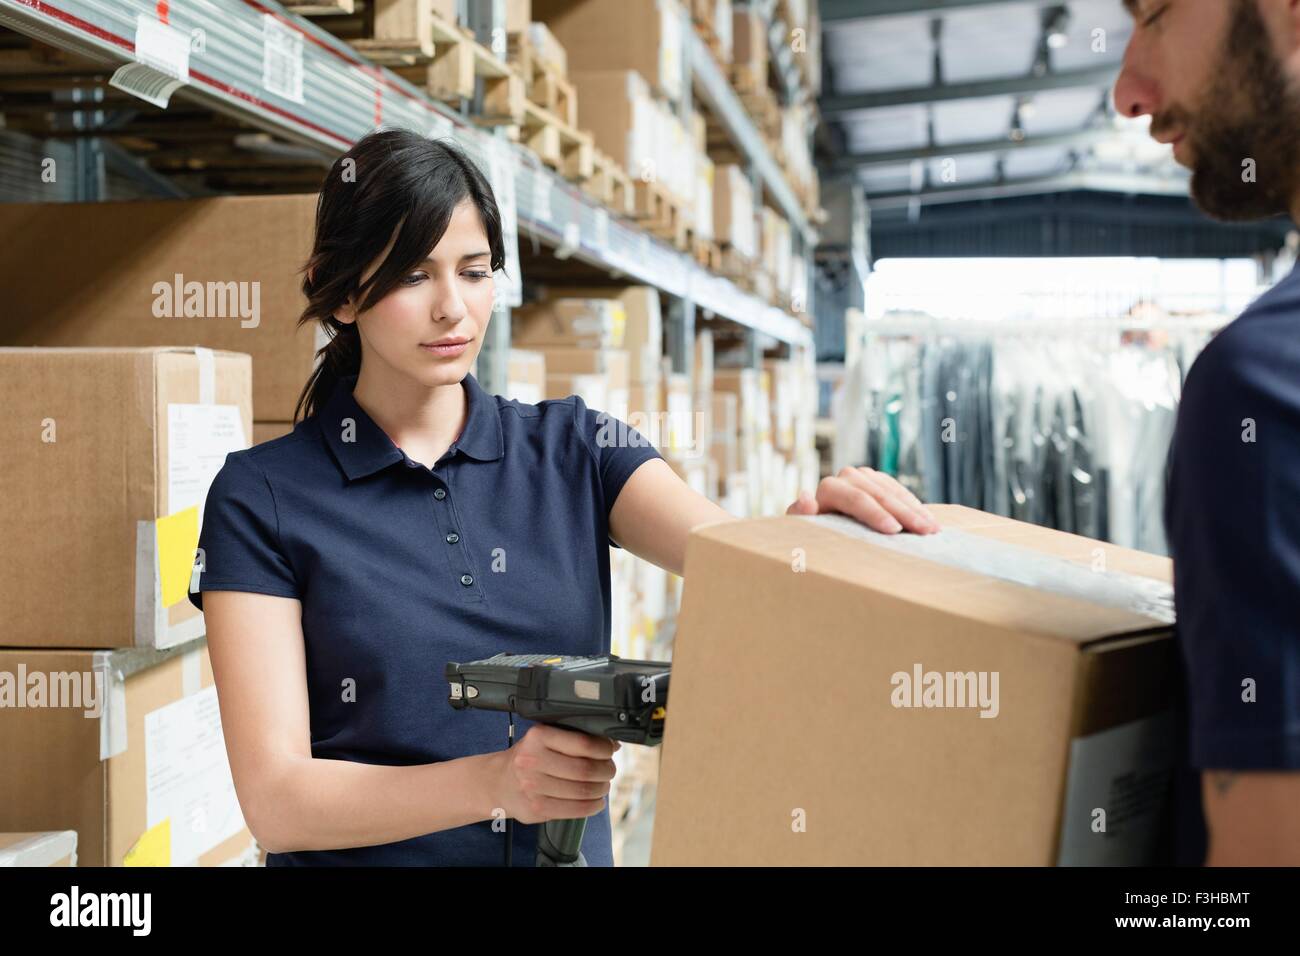 Warehouse workers using barcode scanner on box in distribution warehouse Stock Photo